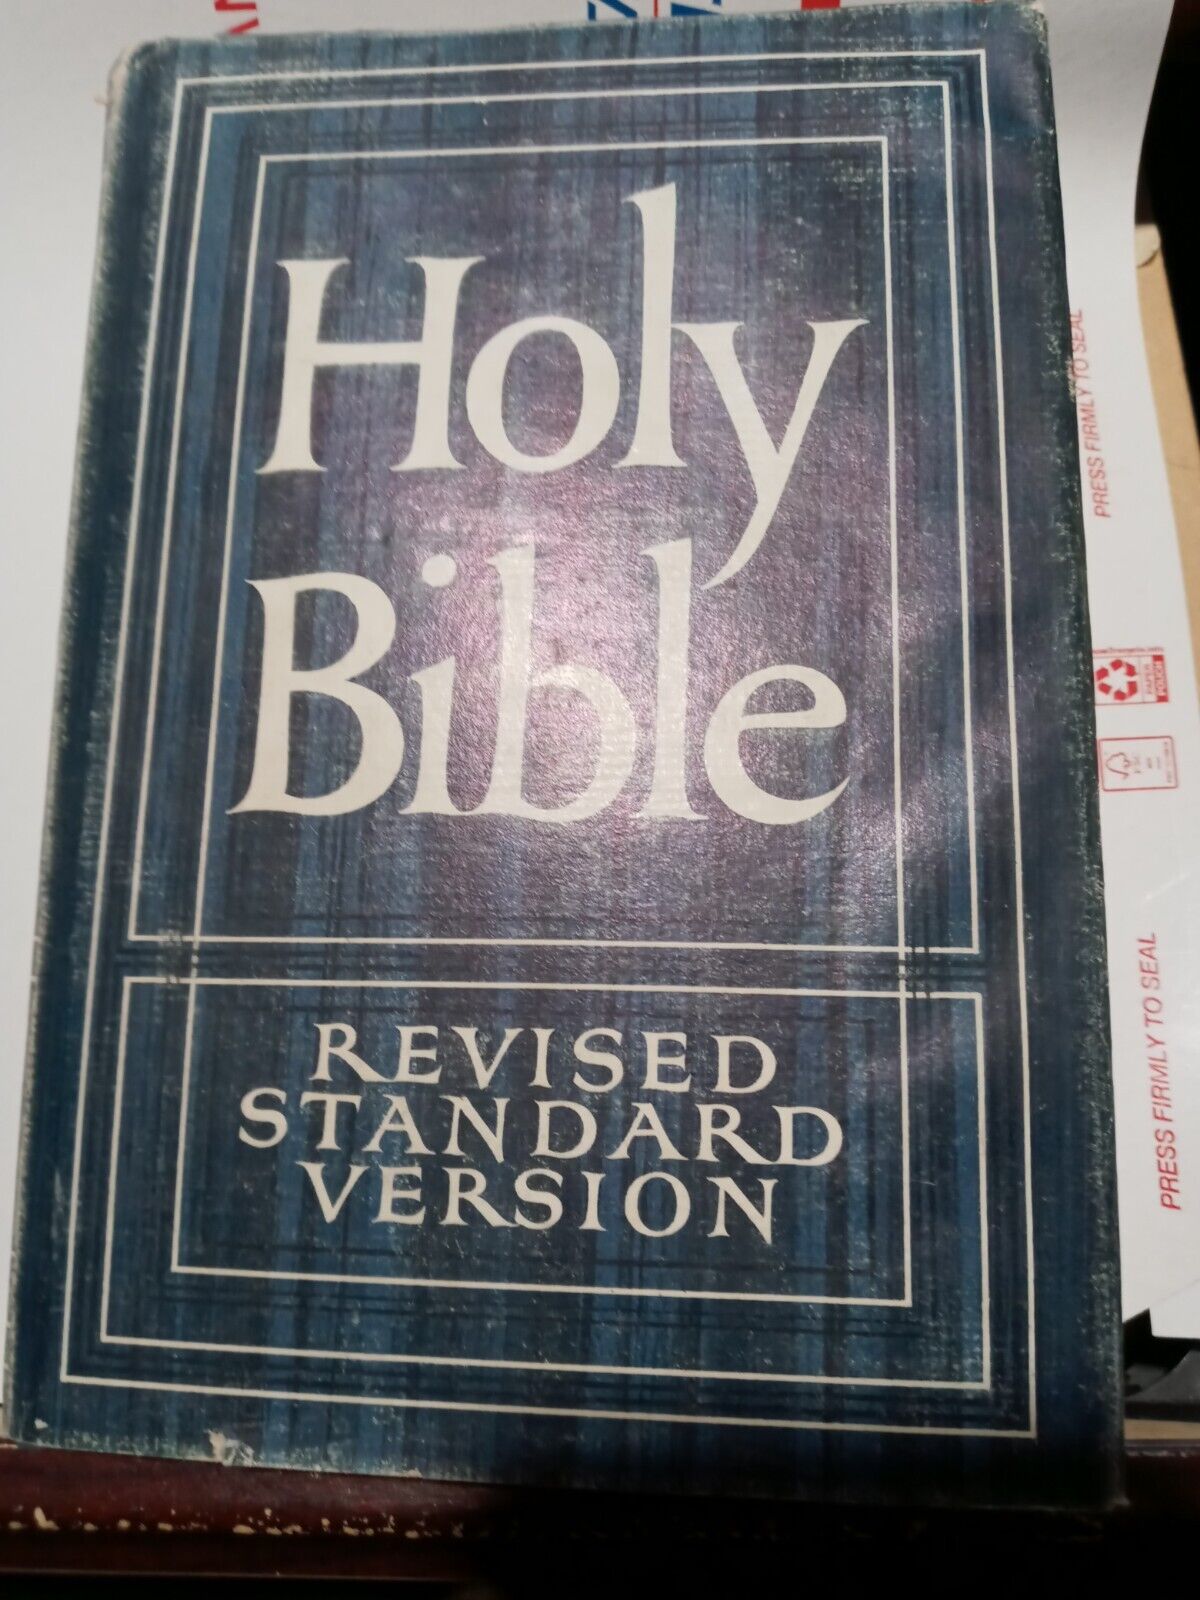 Holy Bible revised standard version 1952 religion spirituality